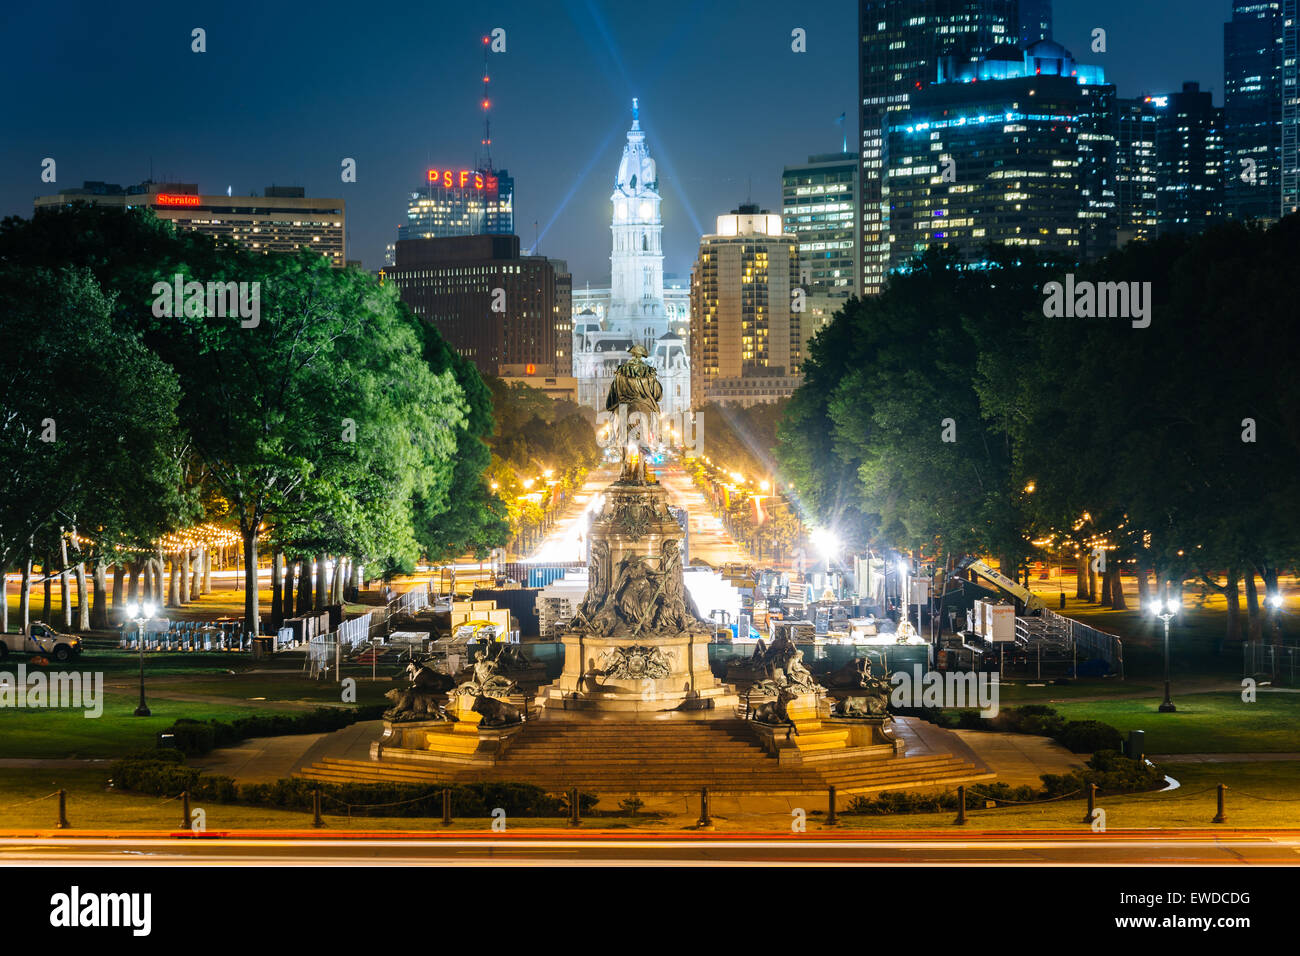 View of Eakins Oval and Center City at night, in Philadelphia, Pennsylvania. Stock Photo